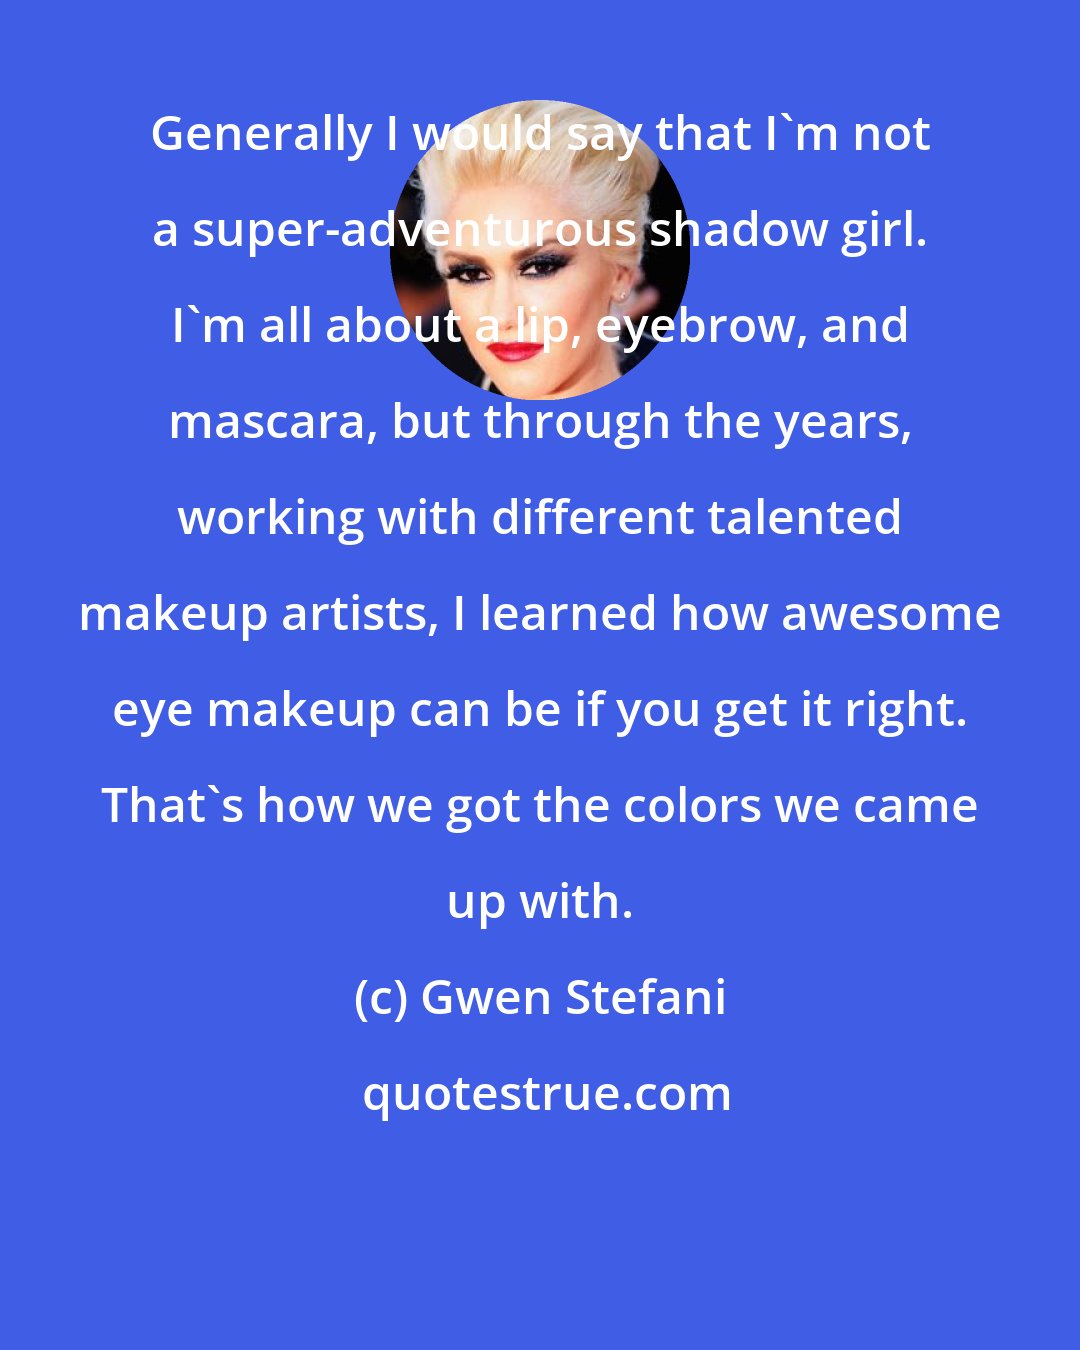 Gwen Stefani: Generally I would say that I'm not a super-adventurous shadow girl. I'm all about a lip, eyebrow, and mascara, but through the years, working with different talented makeup artists, I learned how awesome eye makeup can be if you get it right. That's how we got the colors we came up with.